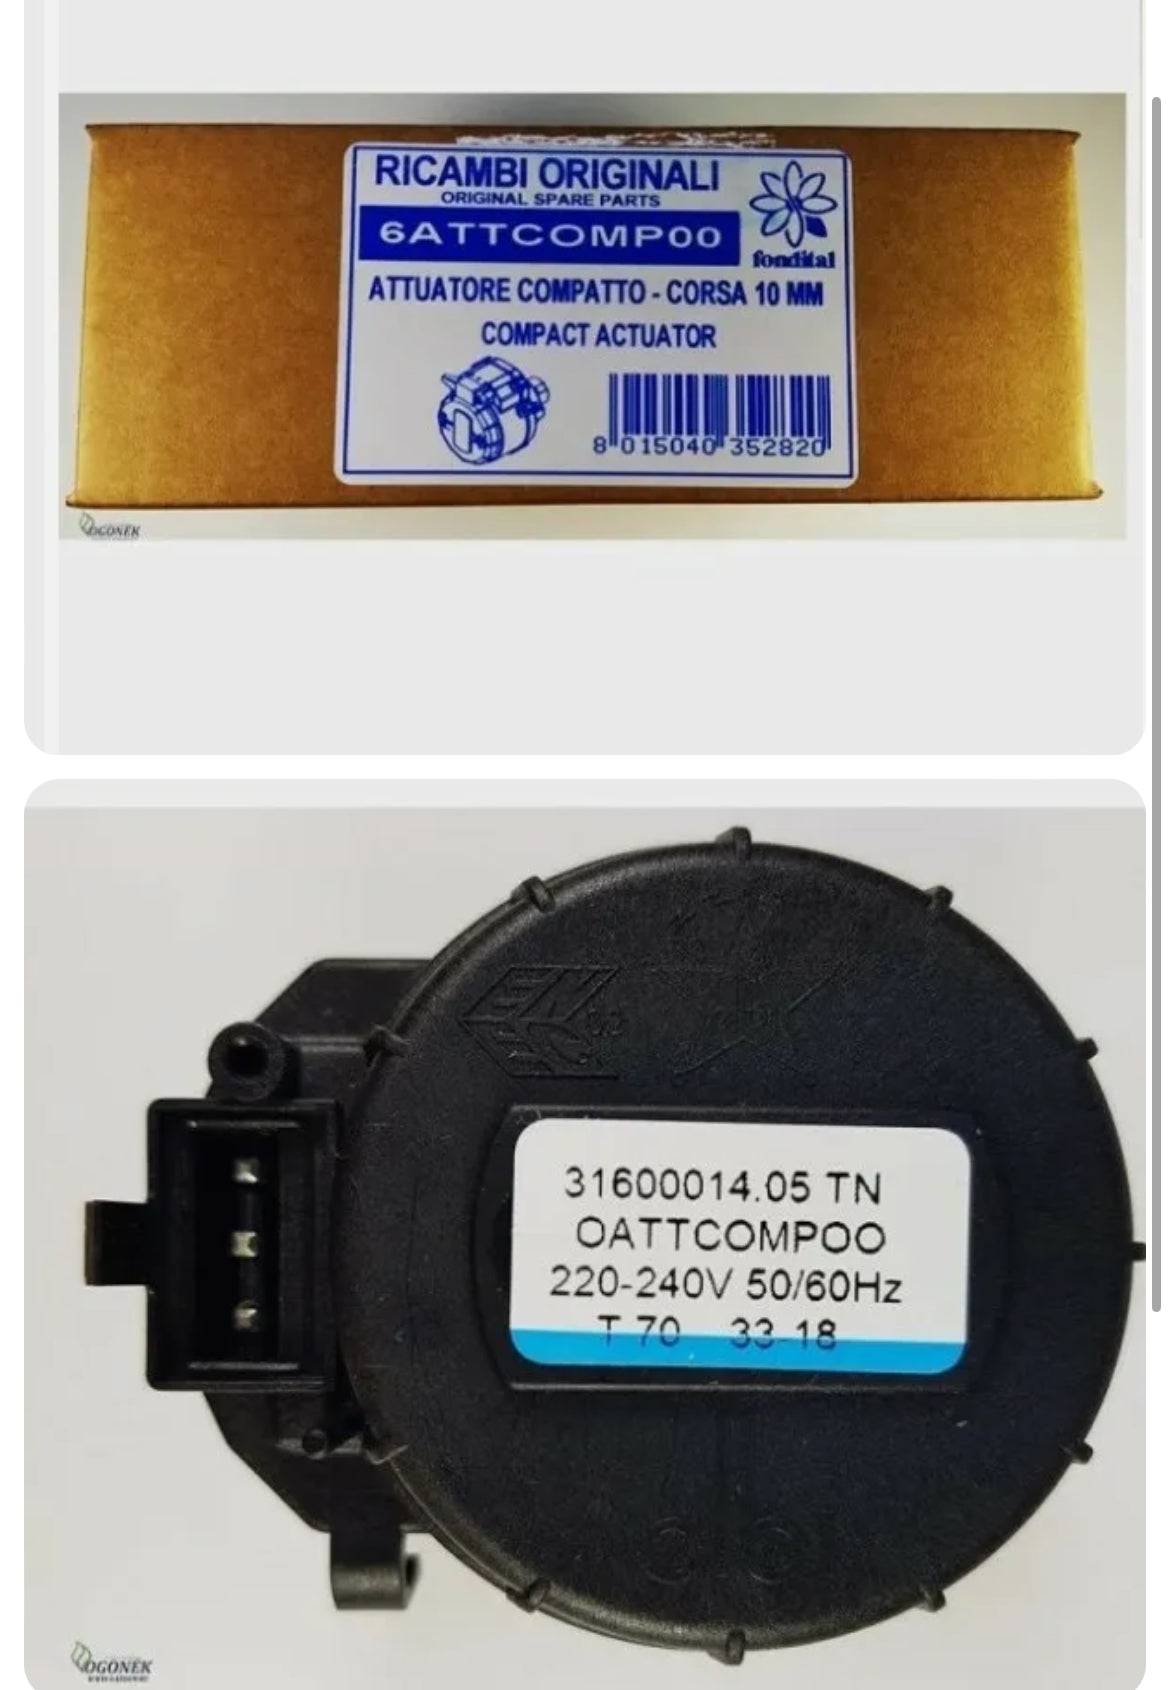 6attcomp00 three-way valve actuator for Compact applications - Stroke 10 mm